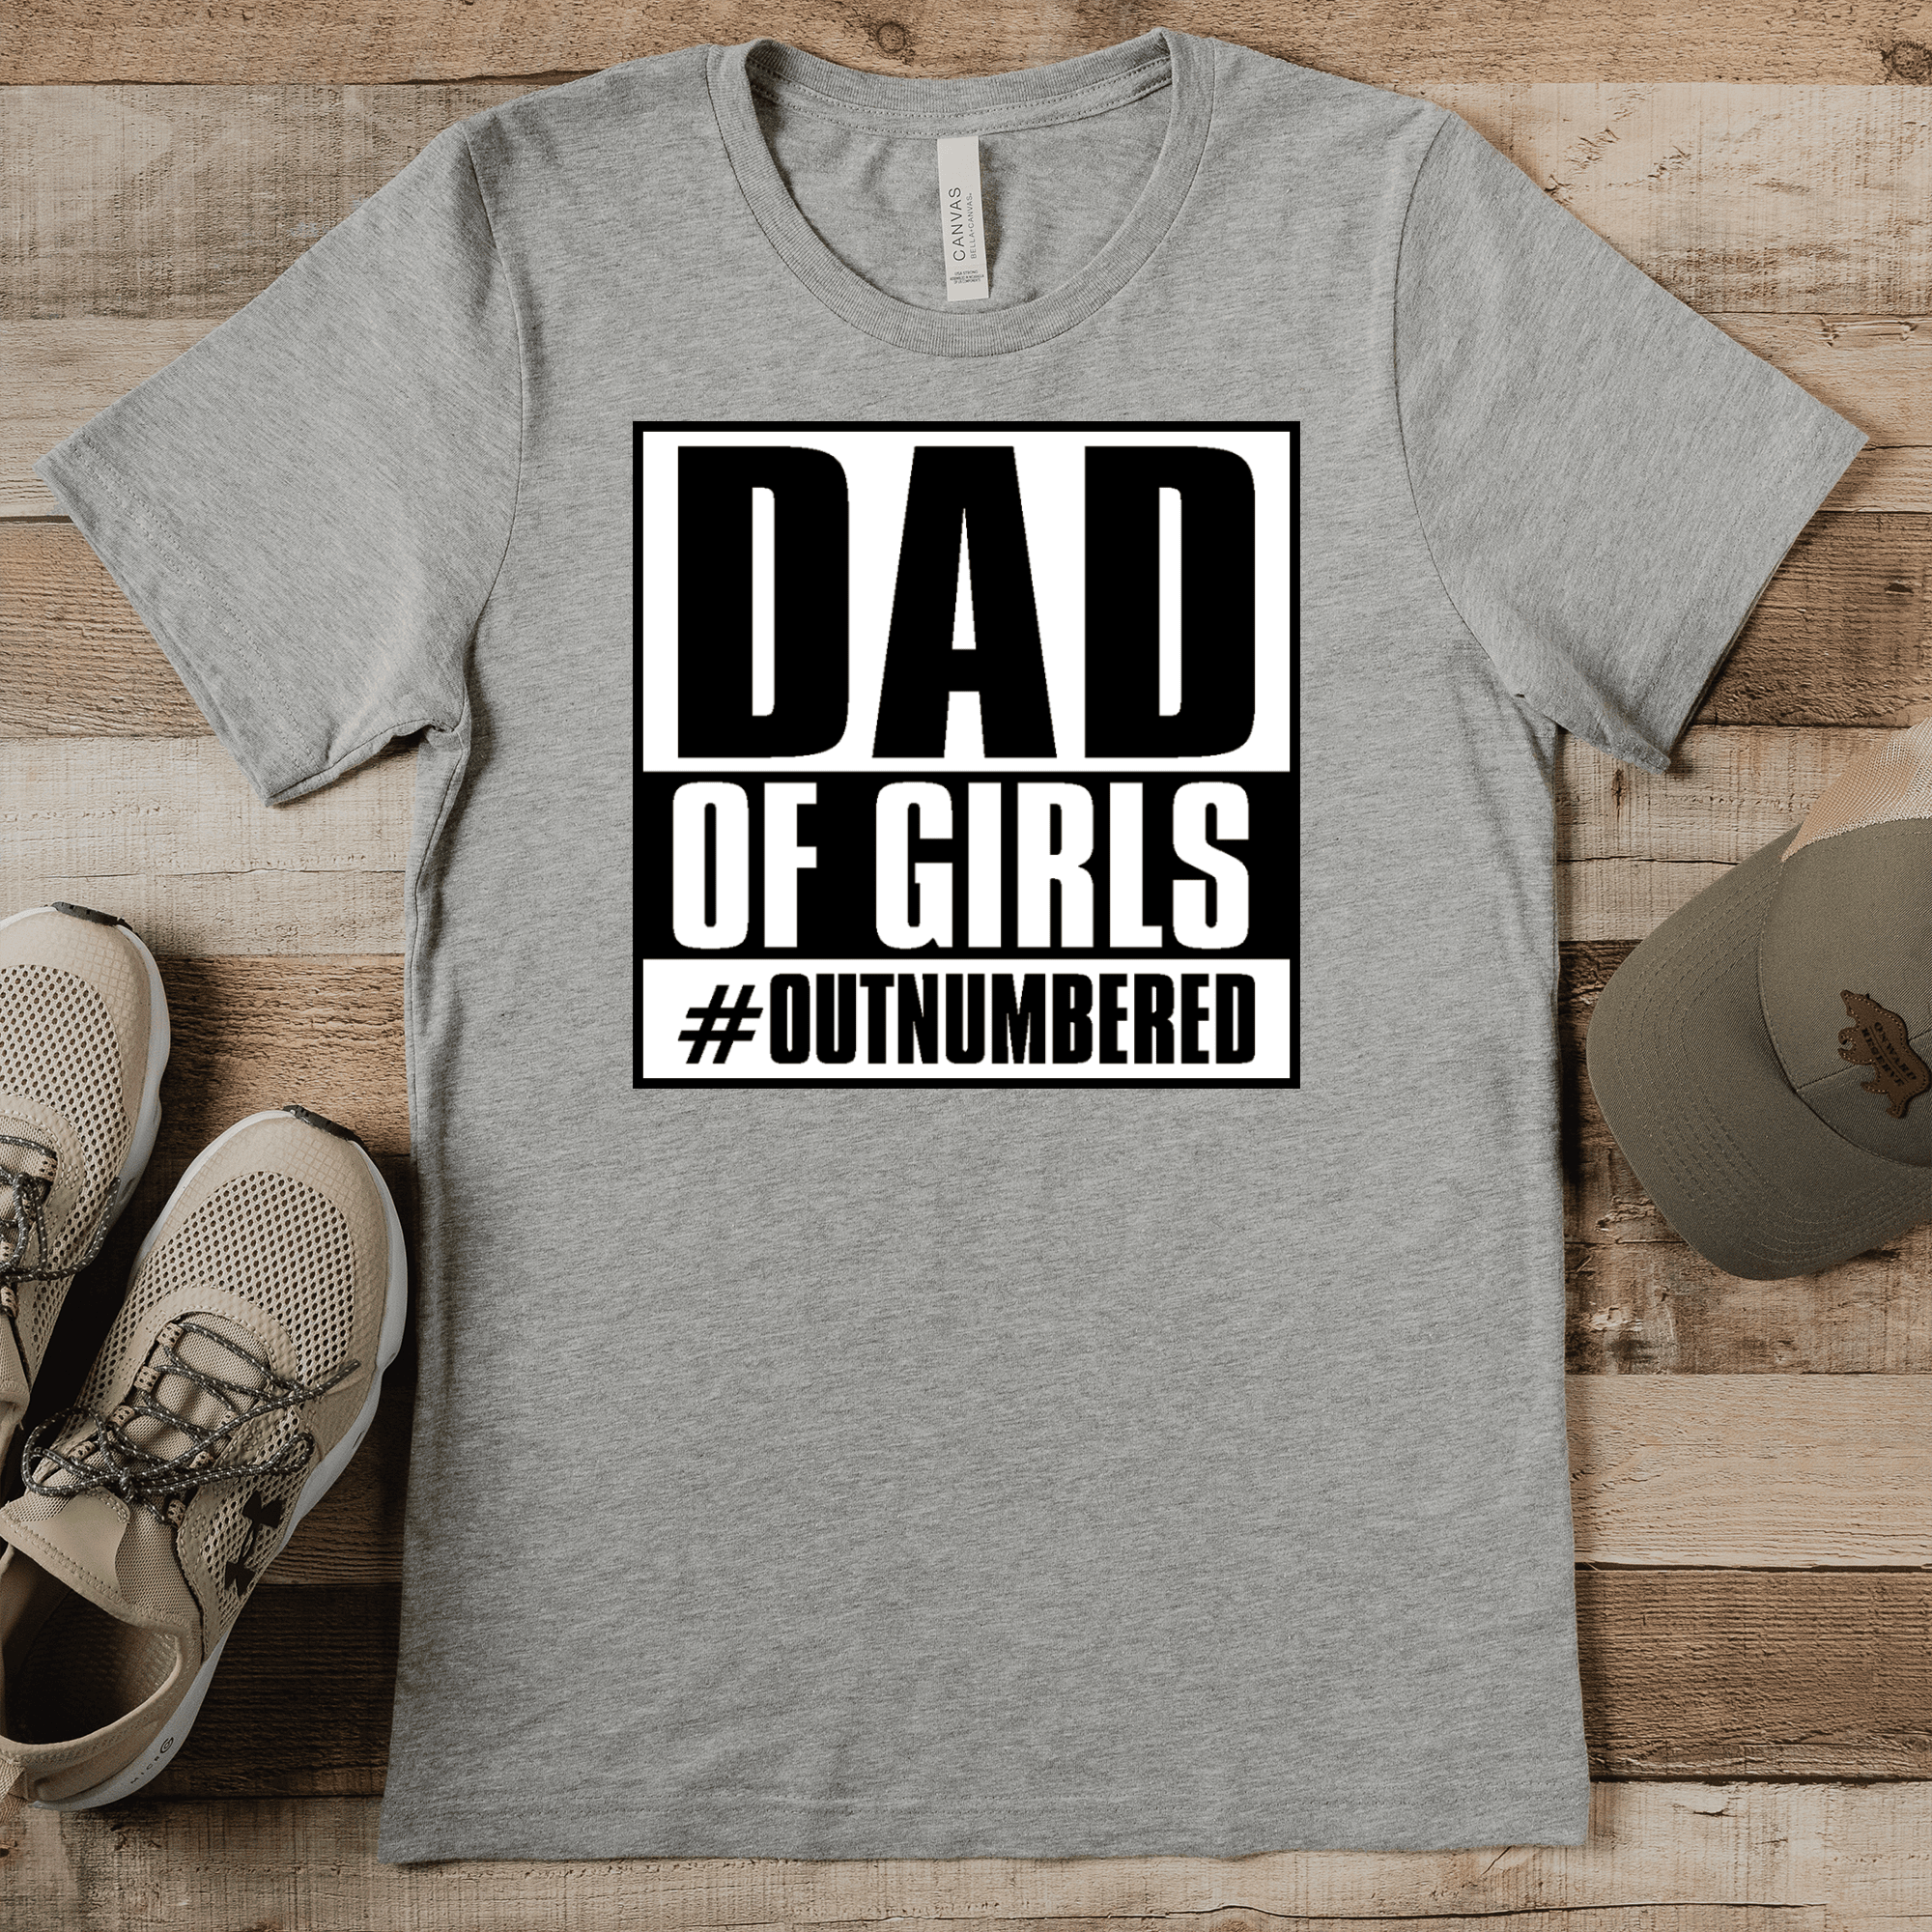 Grey Mens T-Shirt With Outnumbered Girl Dad Design